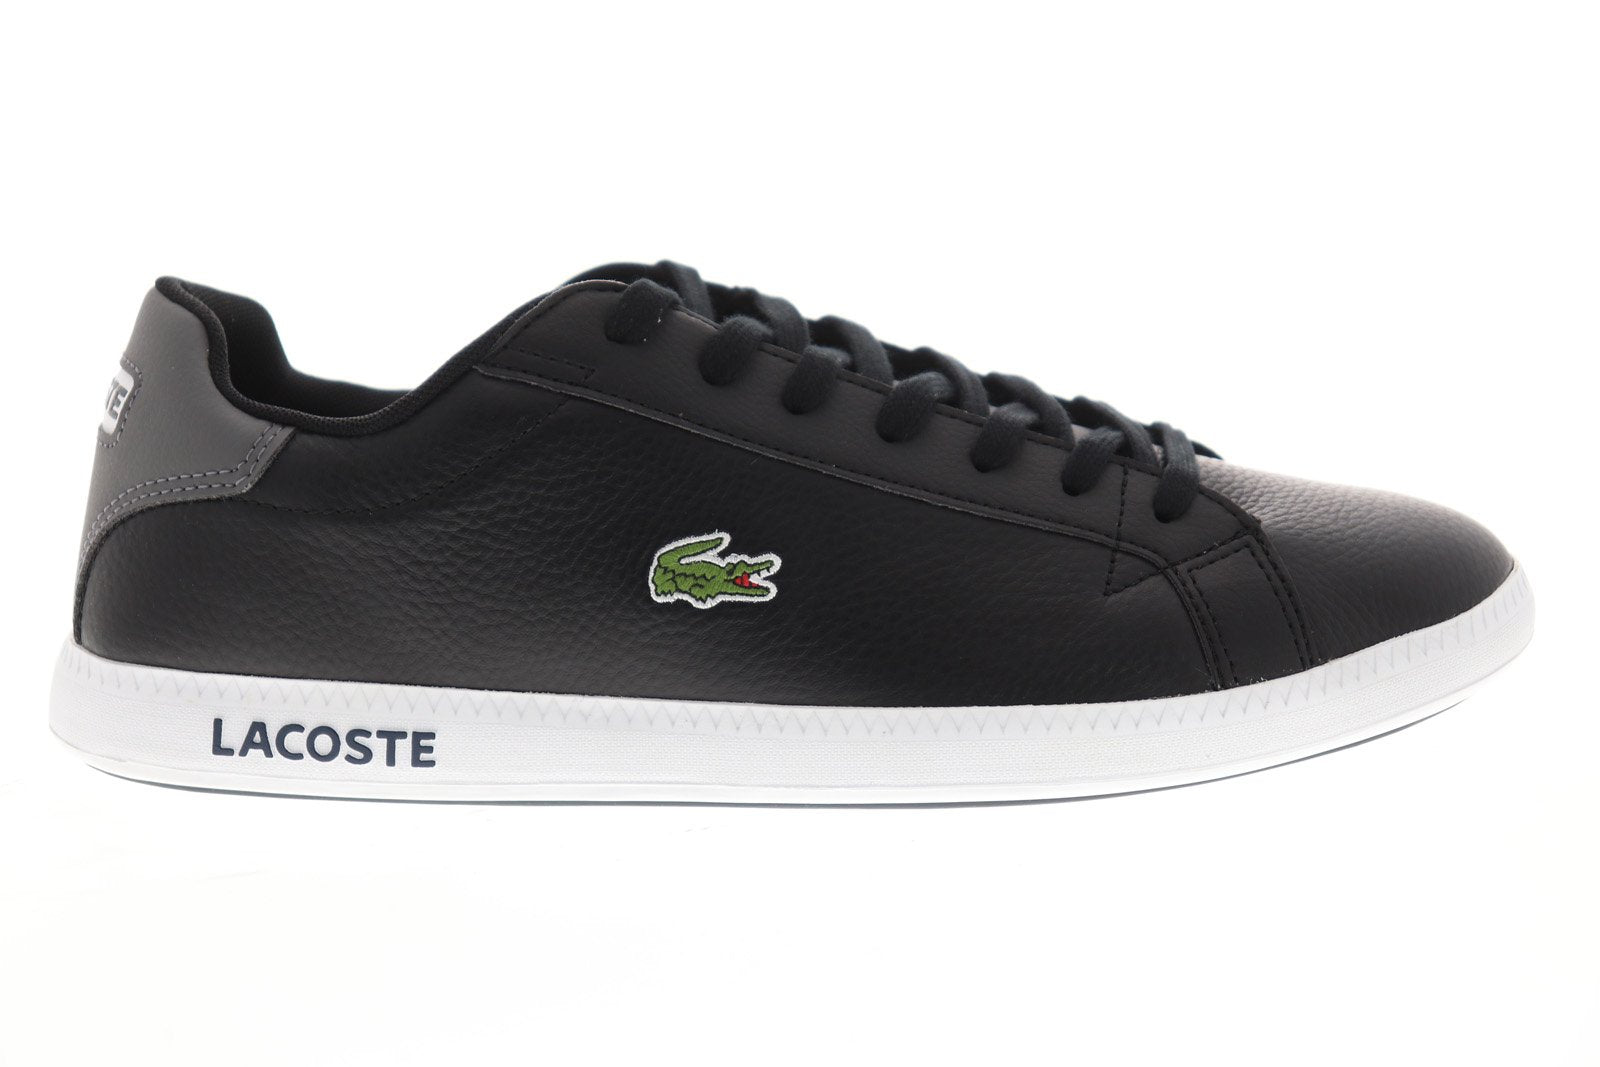 Lacoste Graduate LCR3 Mens Black Casual Lace Up Lifestyle Sneakers Sho Ruze Shoes